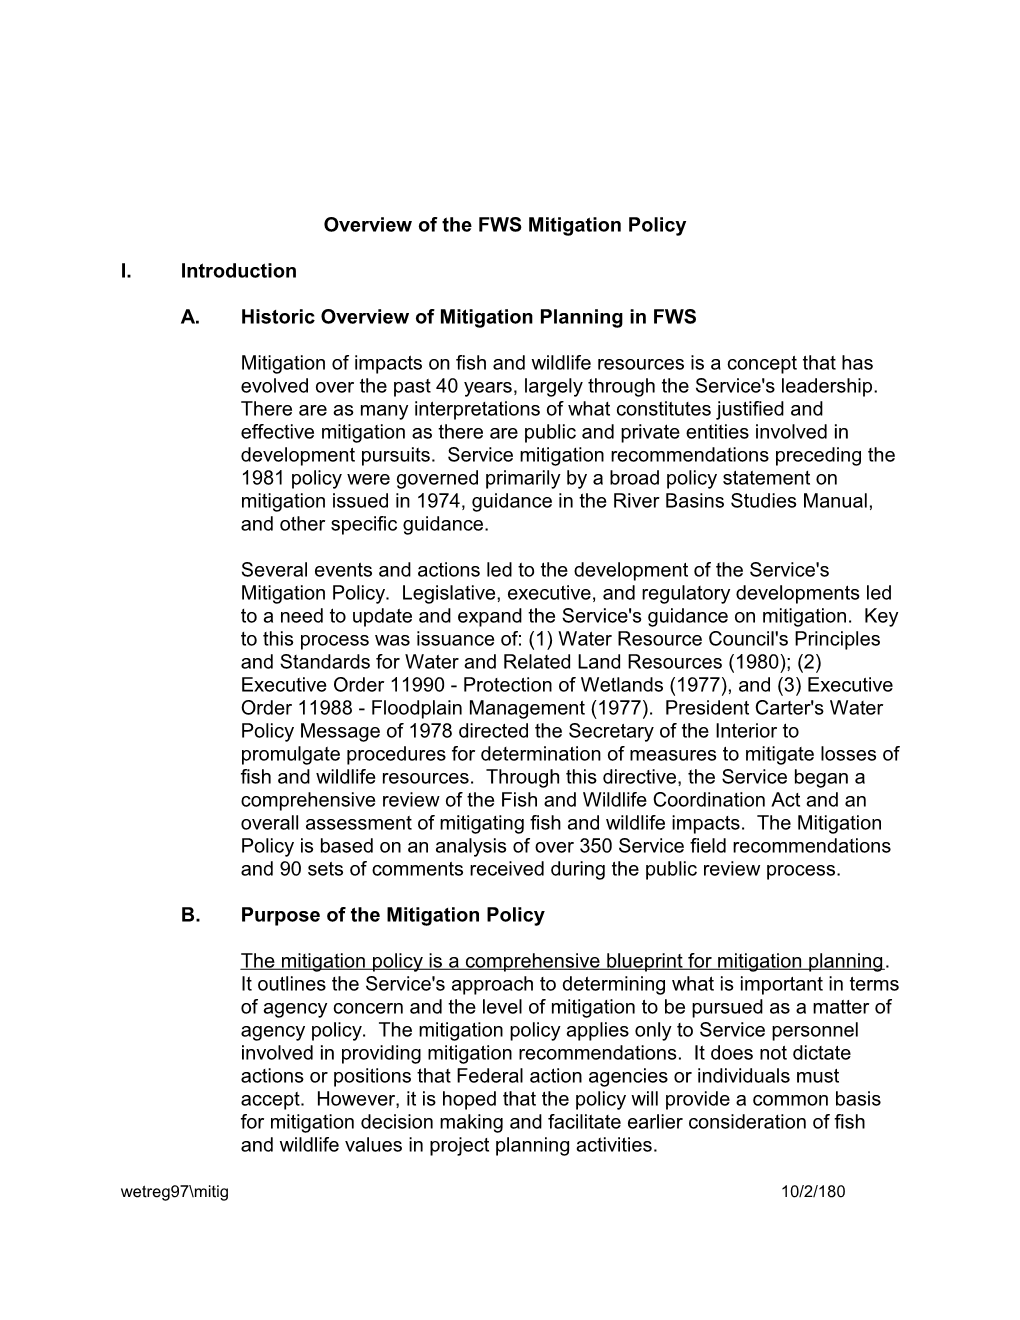 Overview of the FWS Mitigation Policy